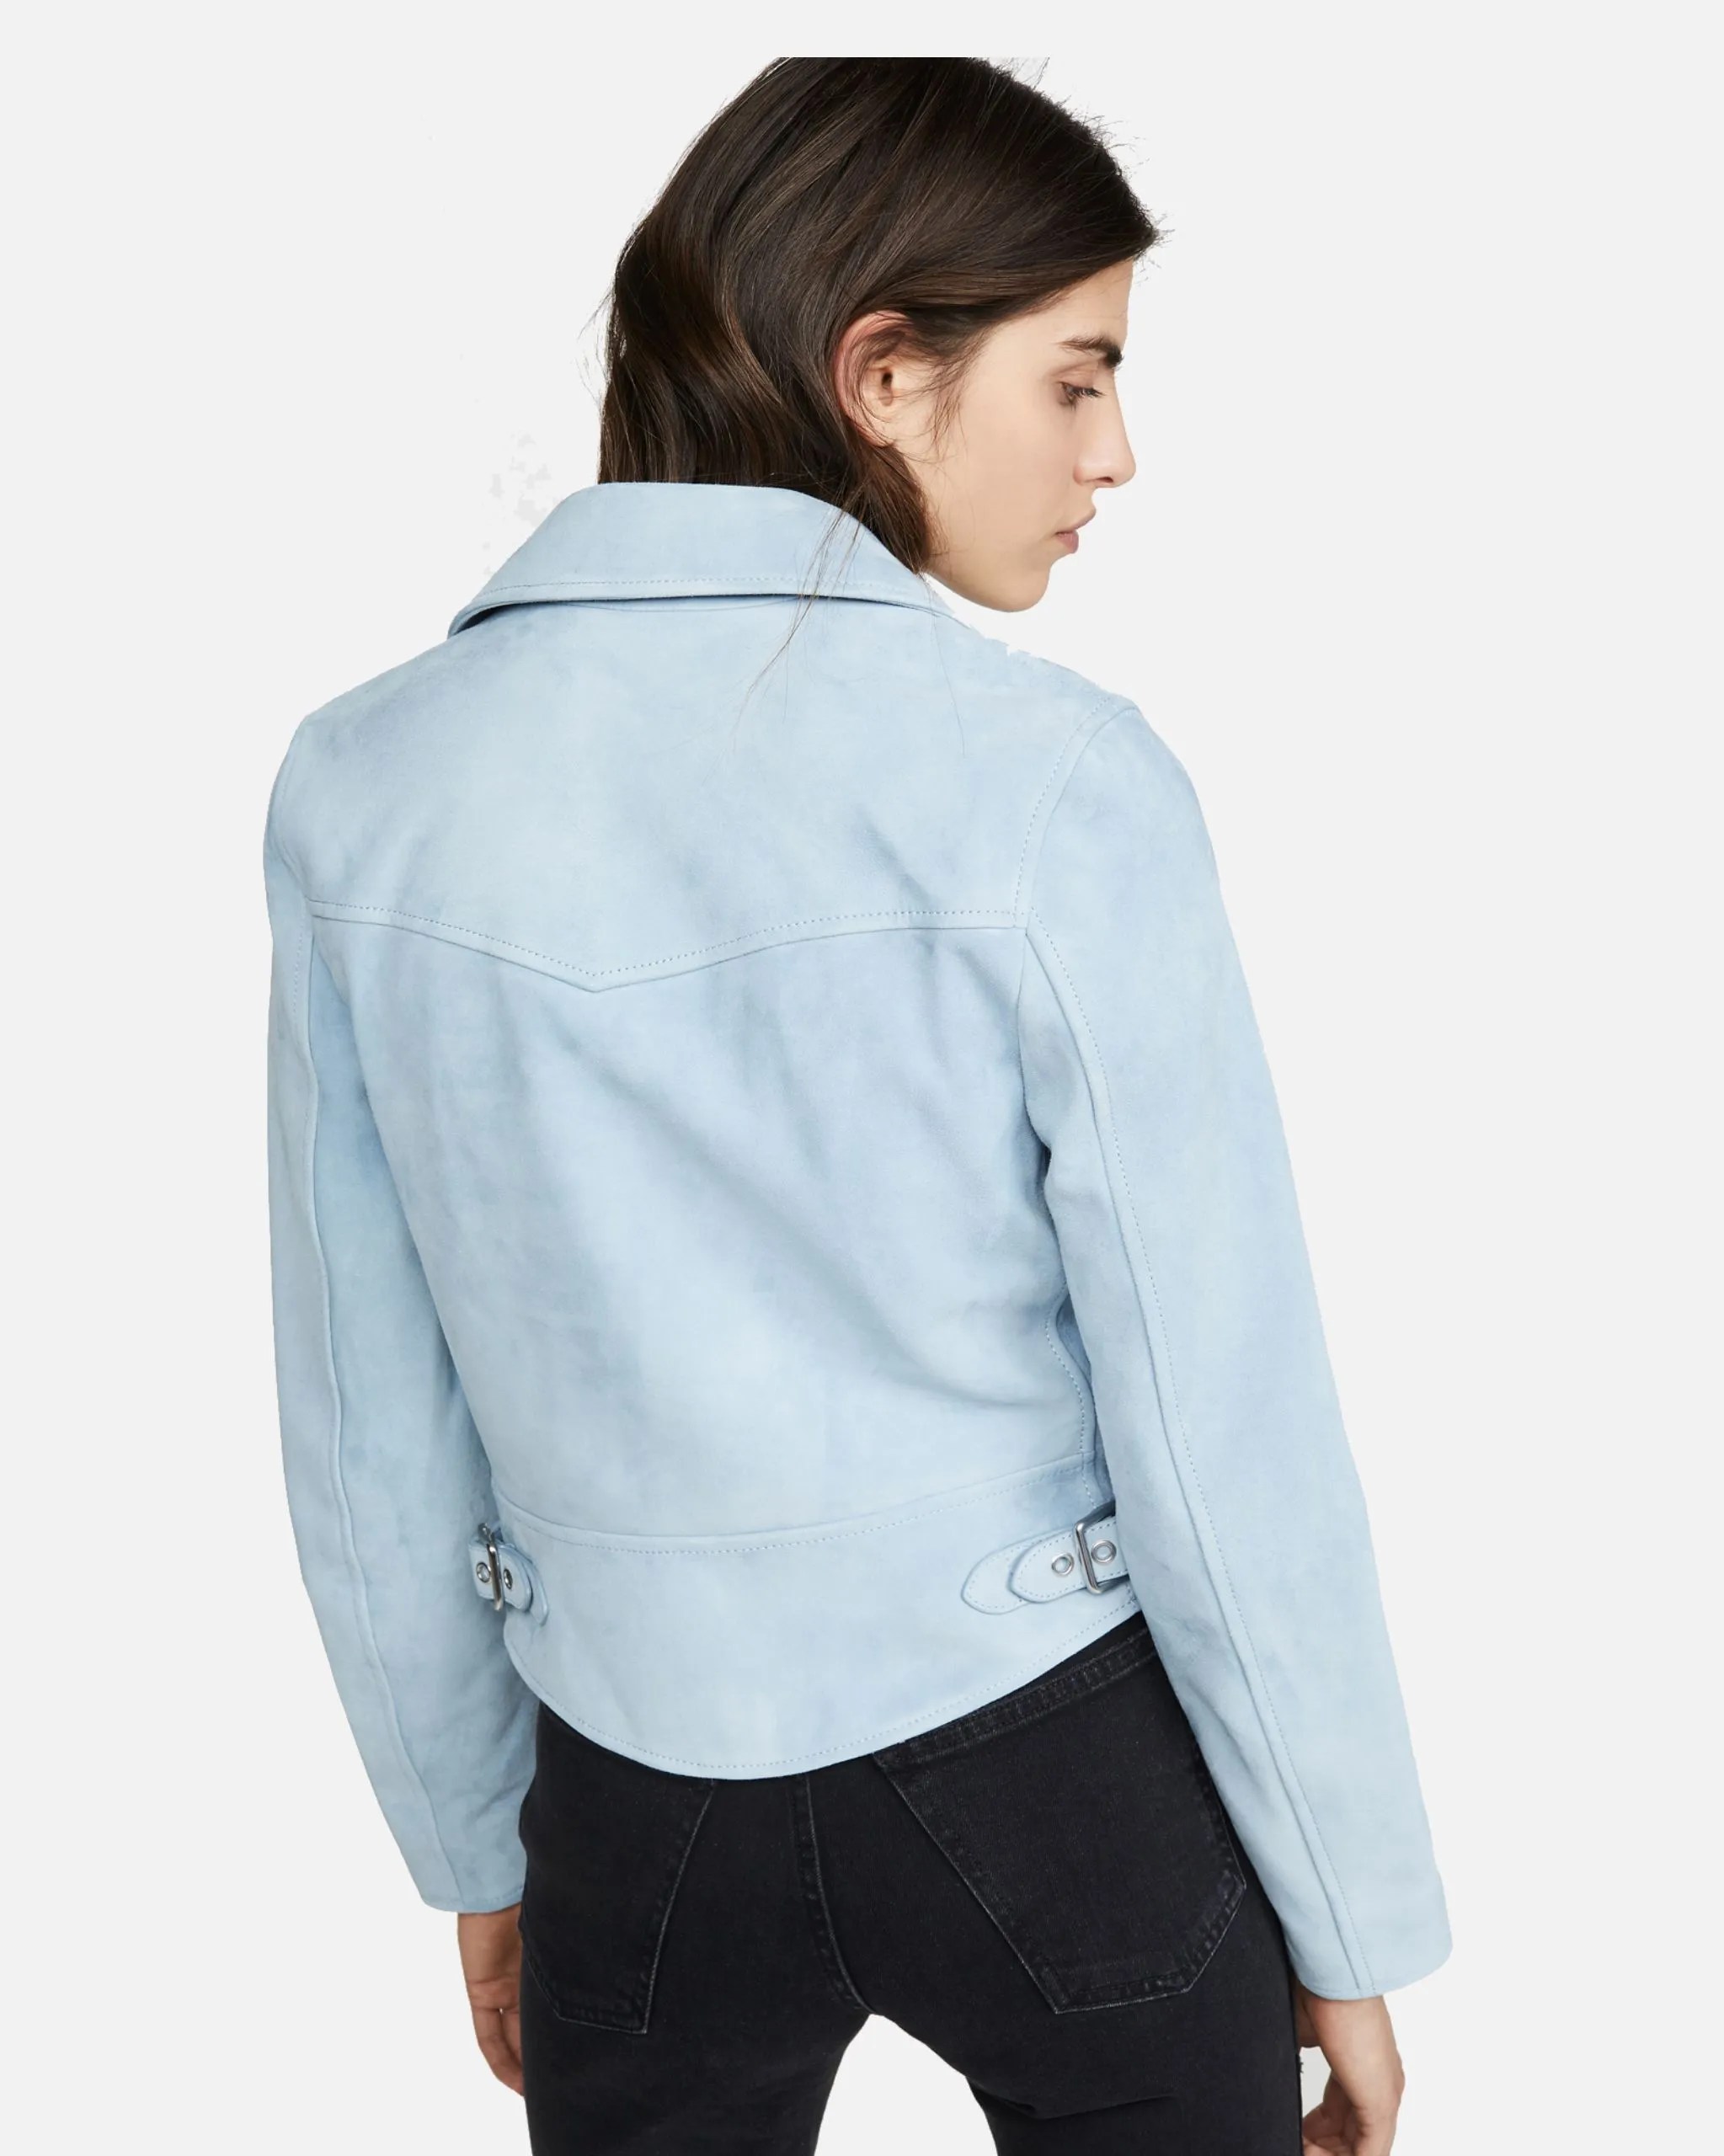 stylish-womens-pale-blue-suede-leather-jacket-on-sale-now (2)